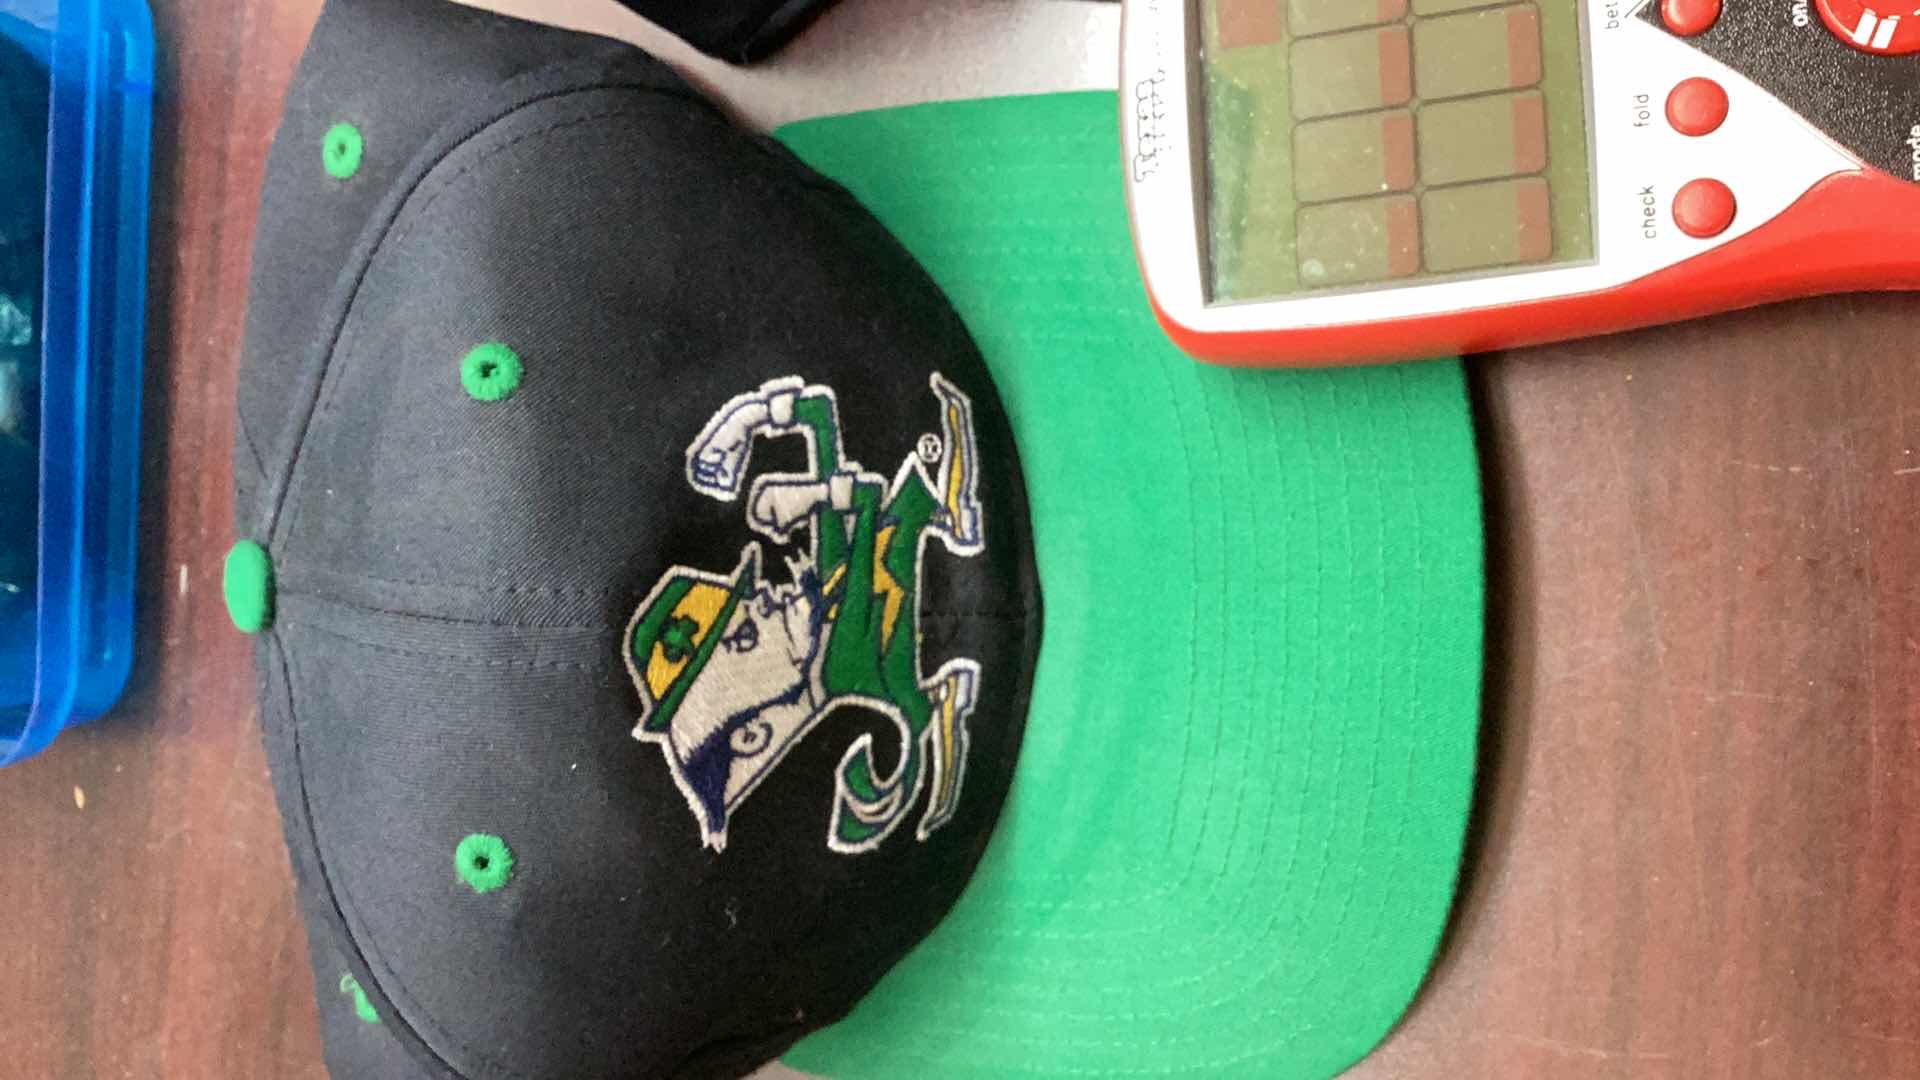 Photo 2 of 2 NOTRE DAMN FOOTBALL CAPS AND HANDHELD GAMES